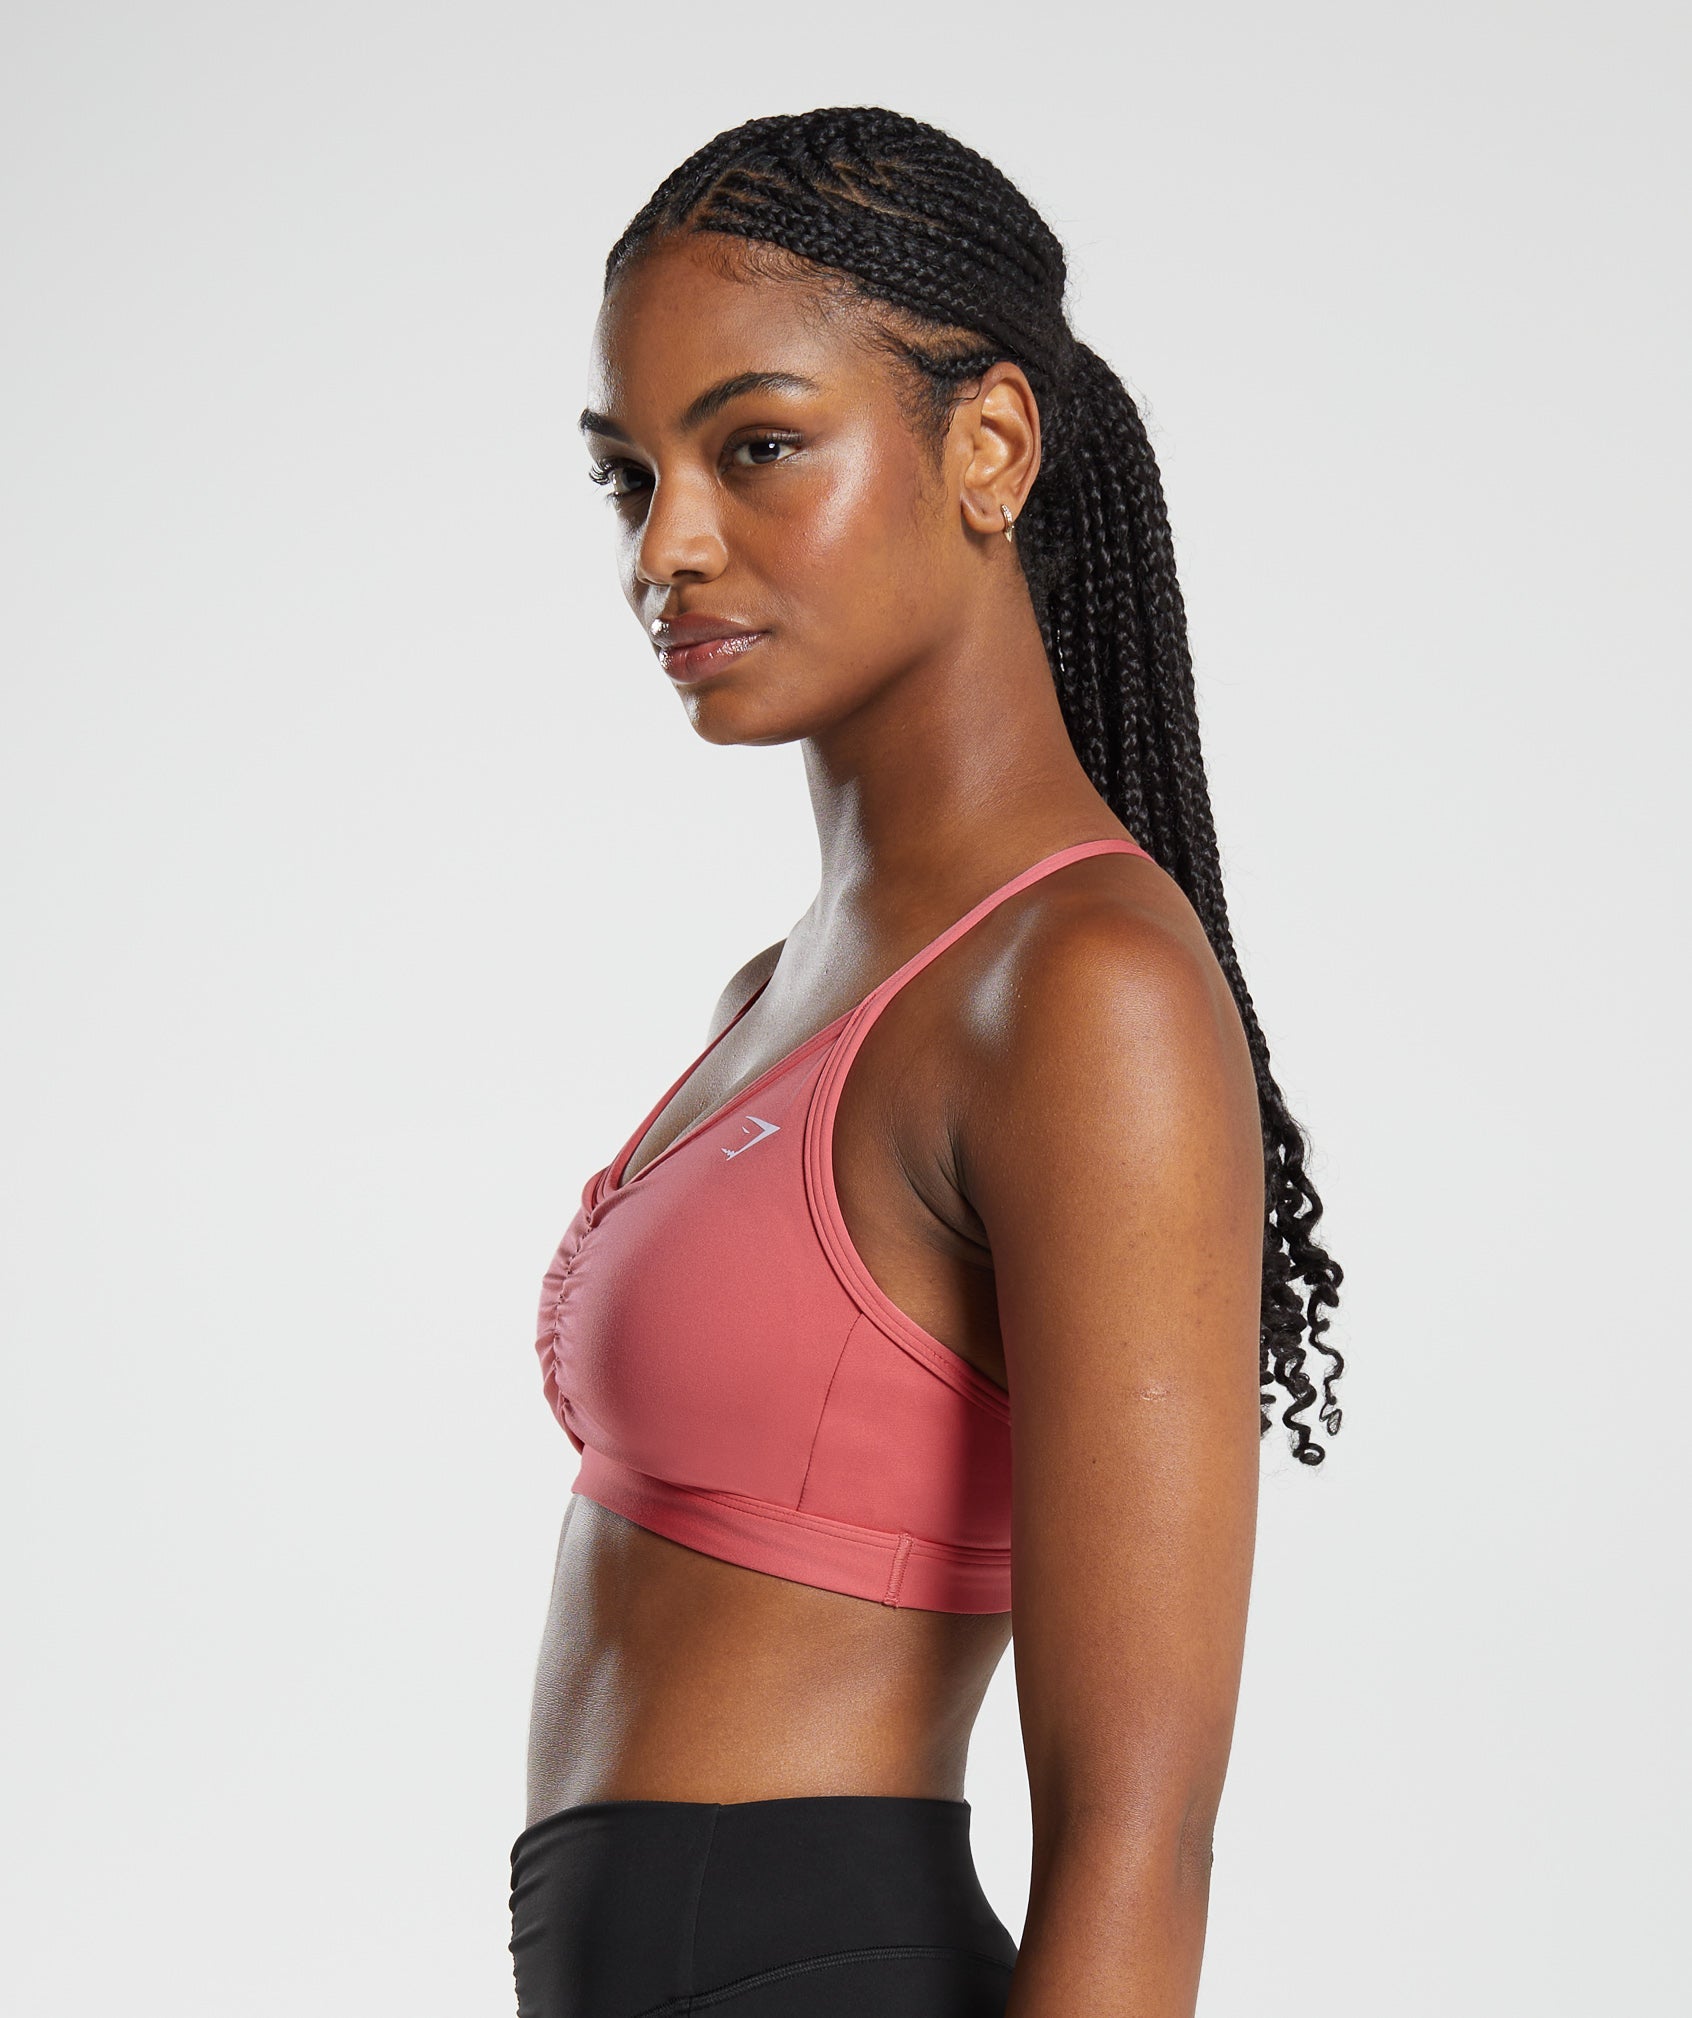 Ruched Sports Bra in Sunbaked Pink - view 3